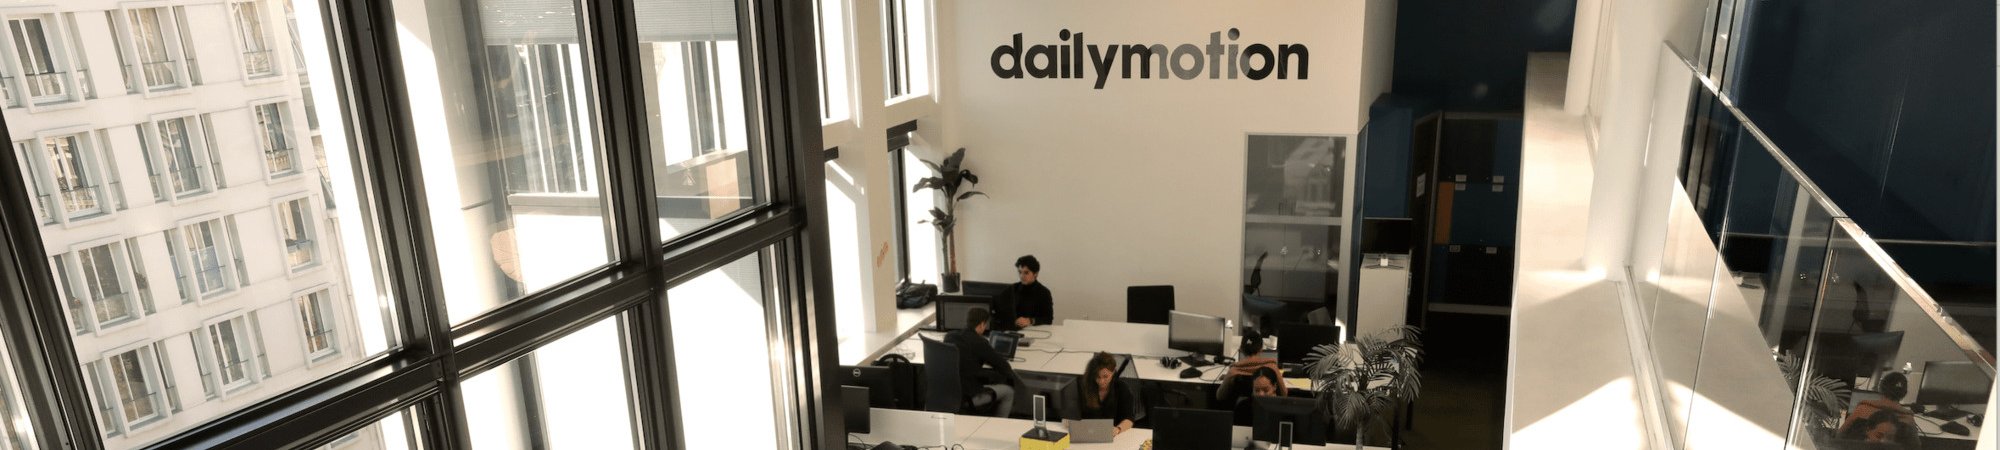 Marketing Content Manager - Dailymotion Advertising (All Genders)